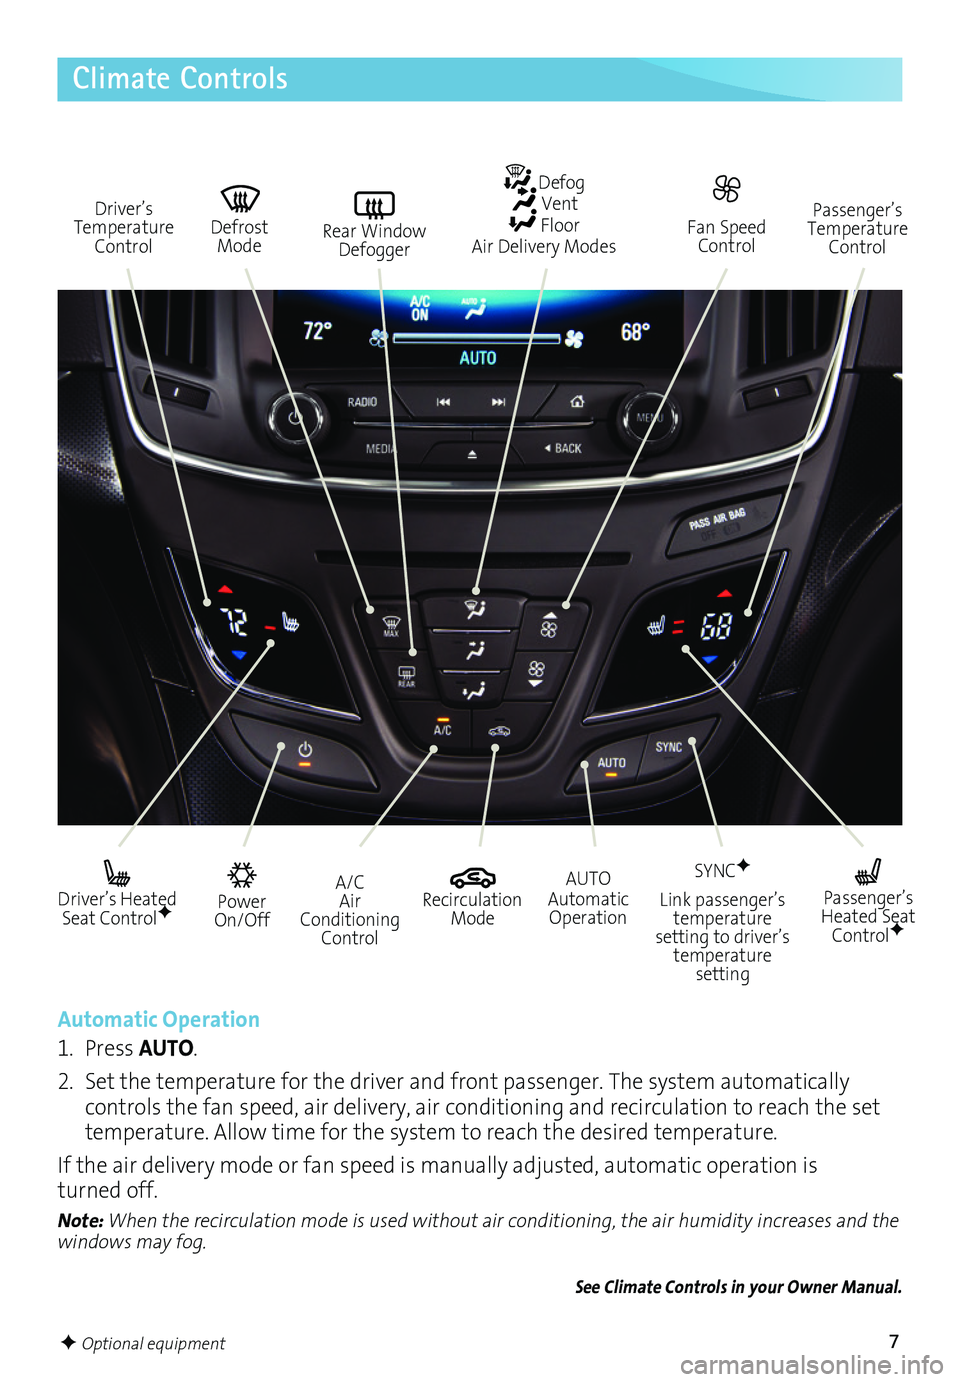 BUICK REGAL 2016  Get To Know Guide 7
Climate Controls
A/C Air Conditioning Control
  Power On/Off
Driver’s Temperature Control
 Driver’s Heated Seat ControlF
  Recirculation Mode
  
Fan Speed Control
AUTO Automatic Operation
   Def